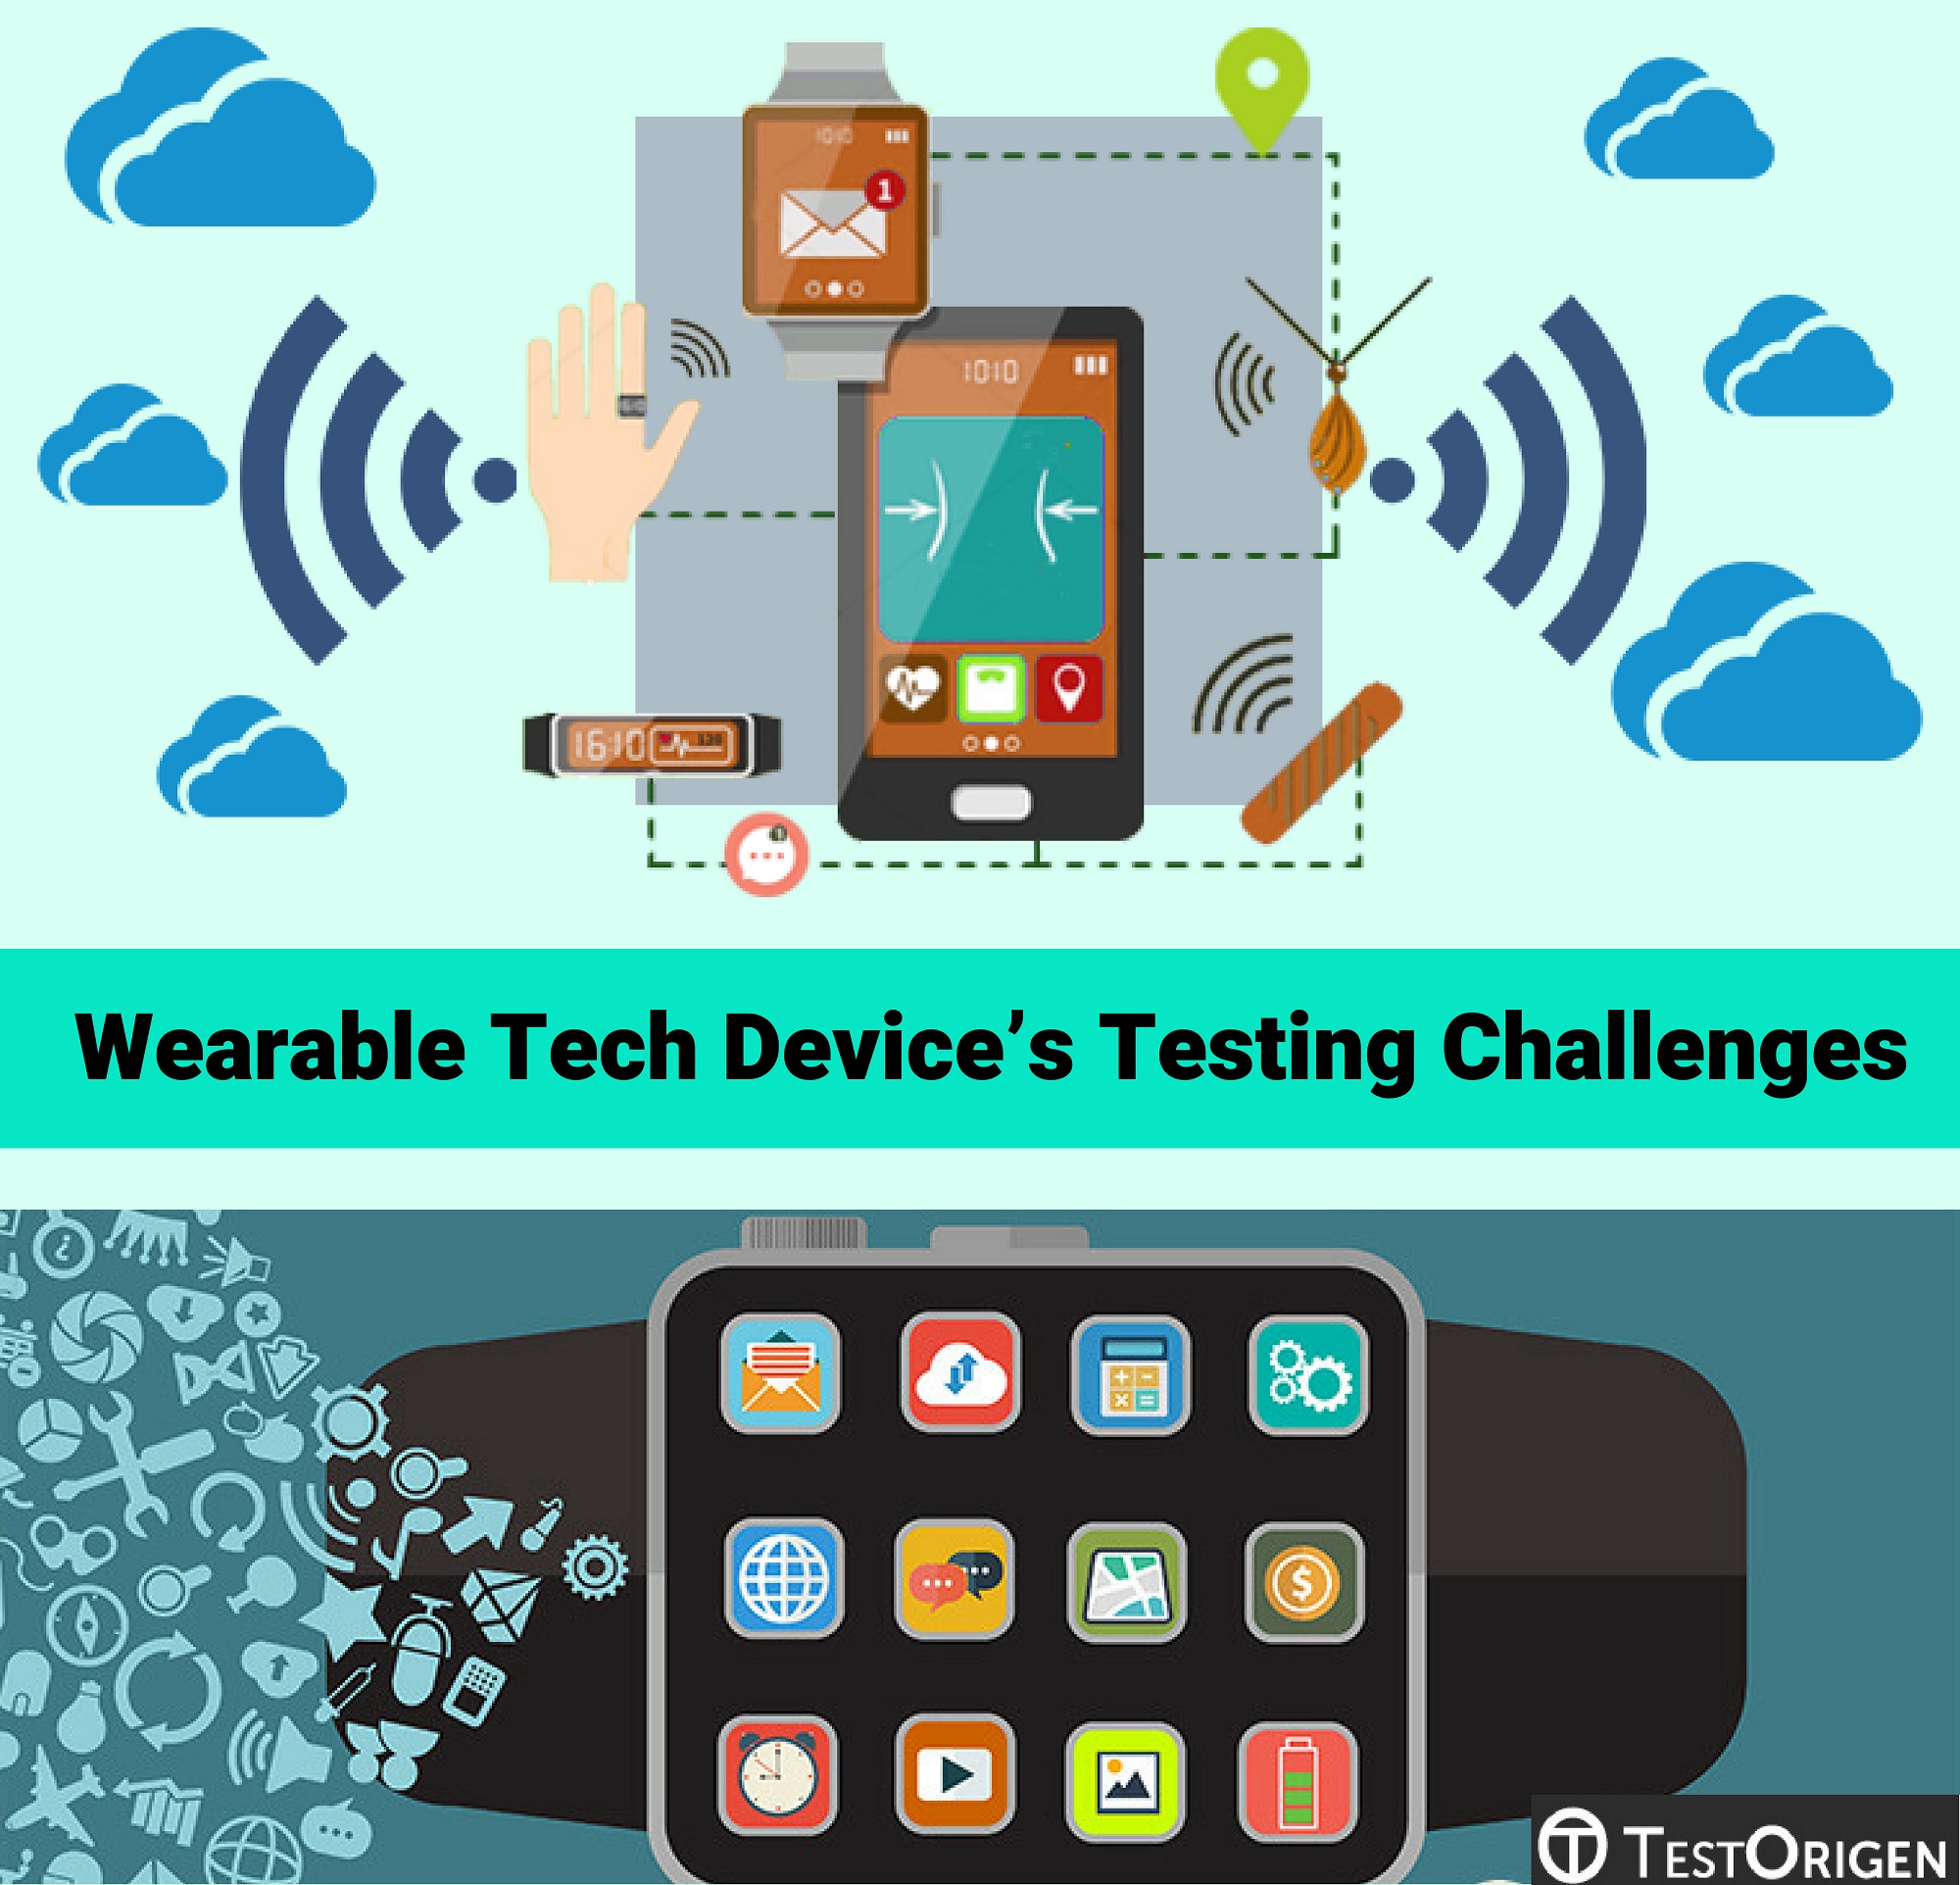 Wearable Tech Device’s Testing Challenges